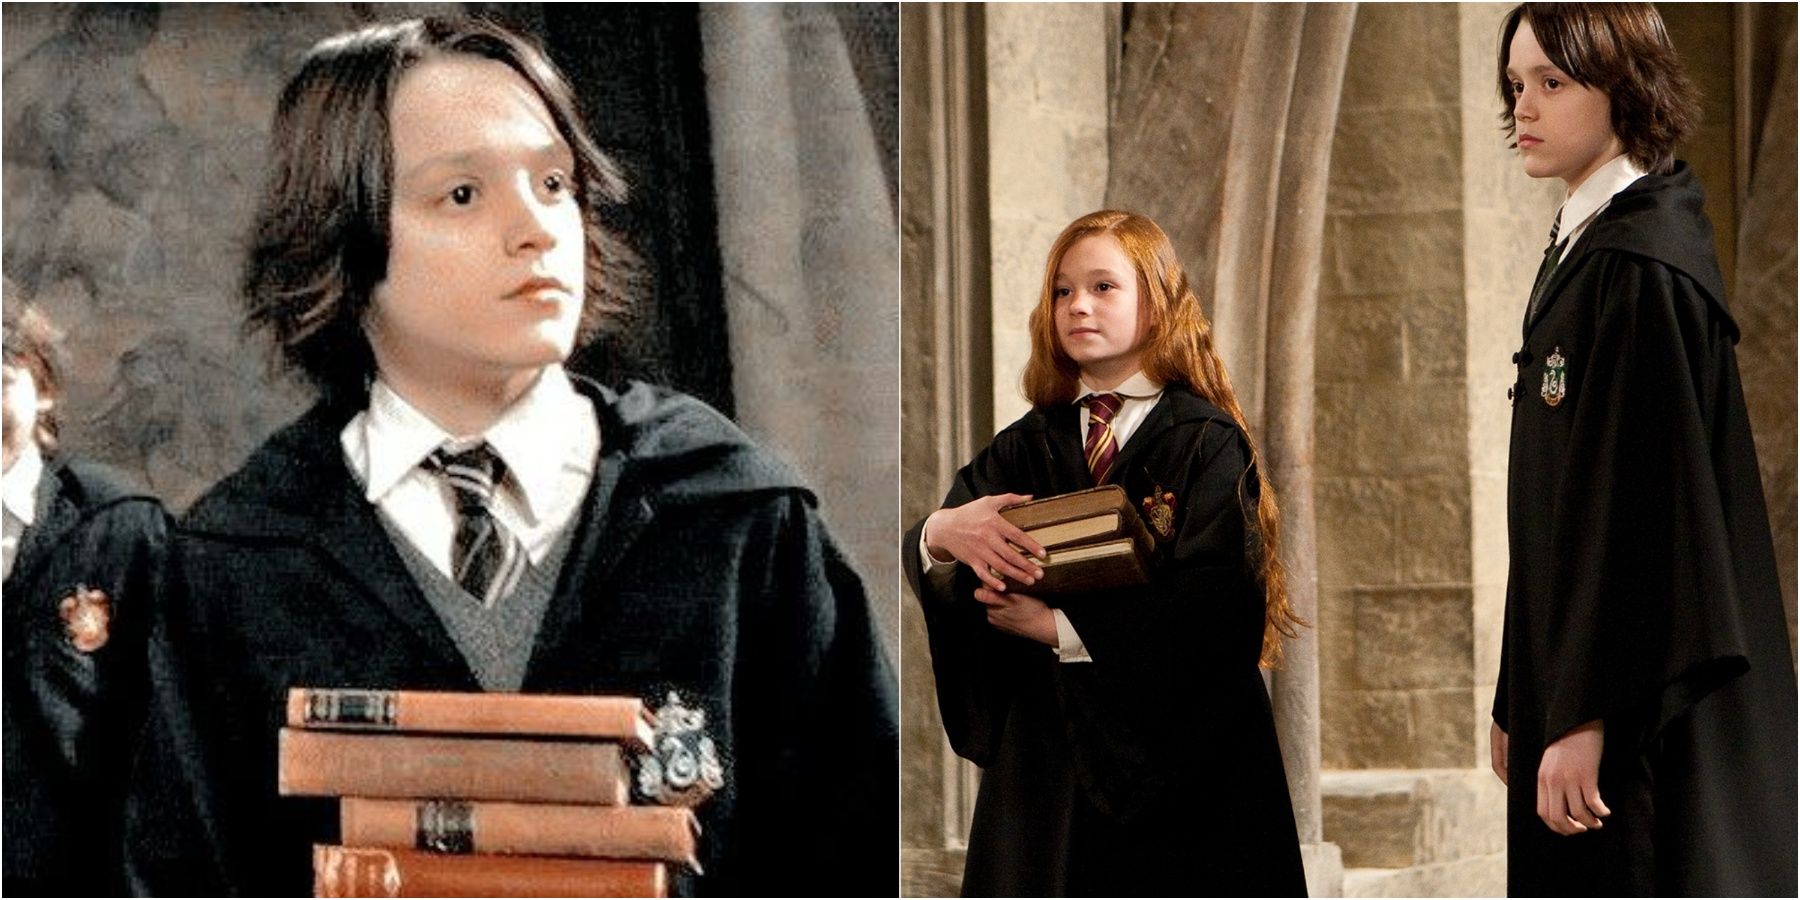 Split image of Snape and Lily Evans at Hogwarts in Harry Potter.